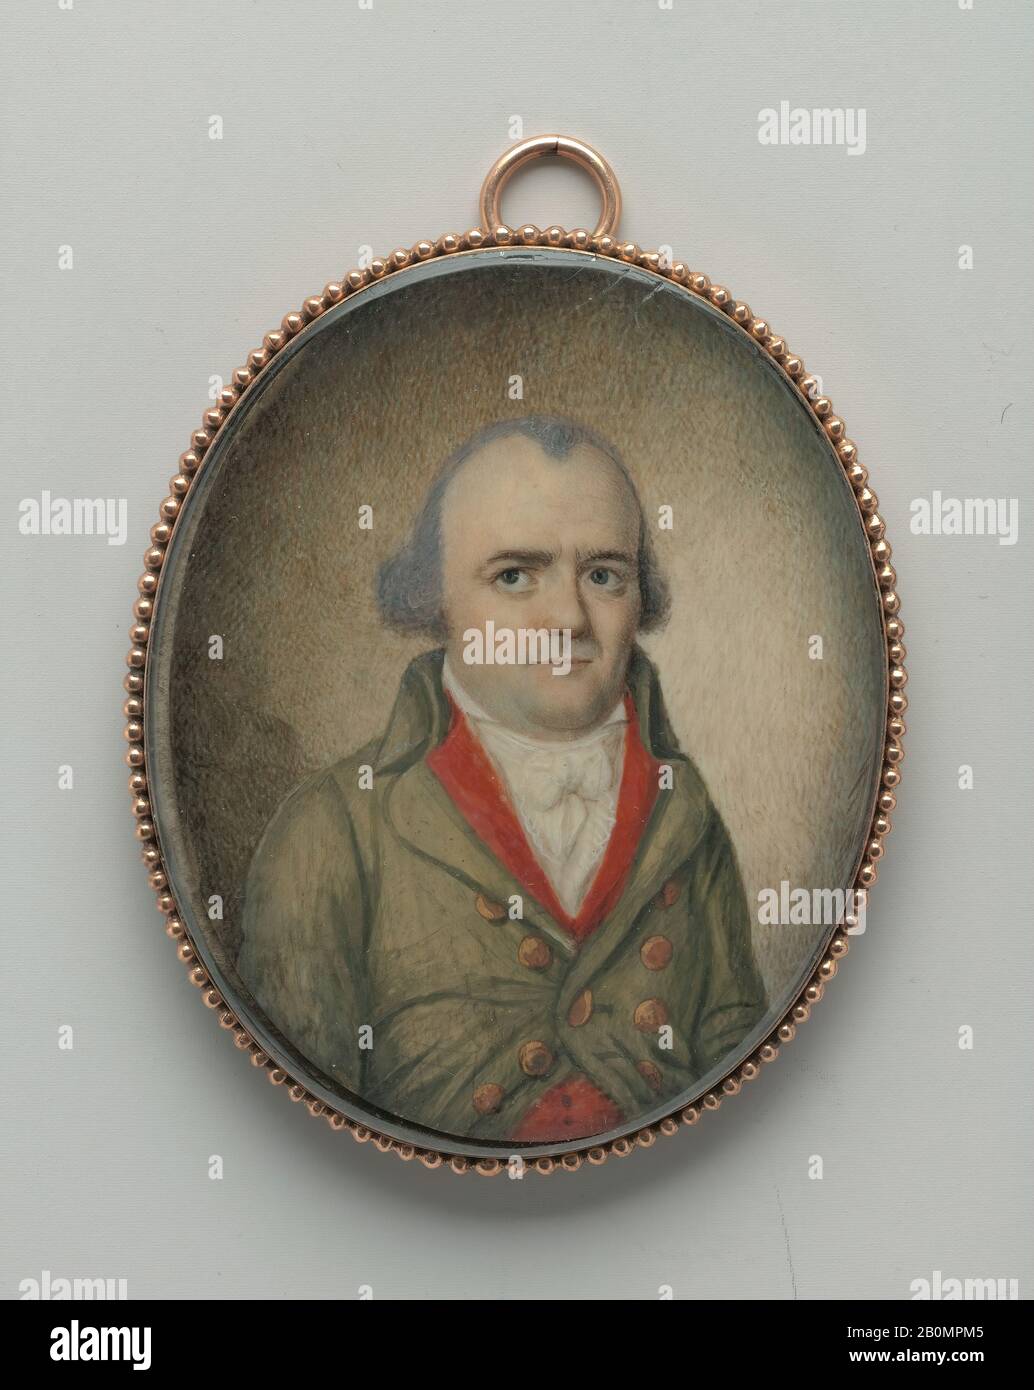 Joseph Griffiths, American, 1794, American, Watercolor on ivory, 2 7/16 x 1 15/16 in. (6.2 x 4.9 cm), Paintings Stock Photo